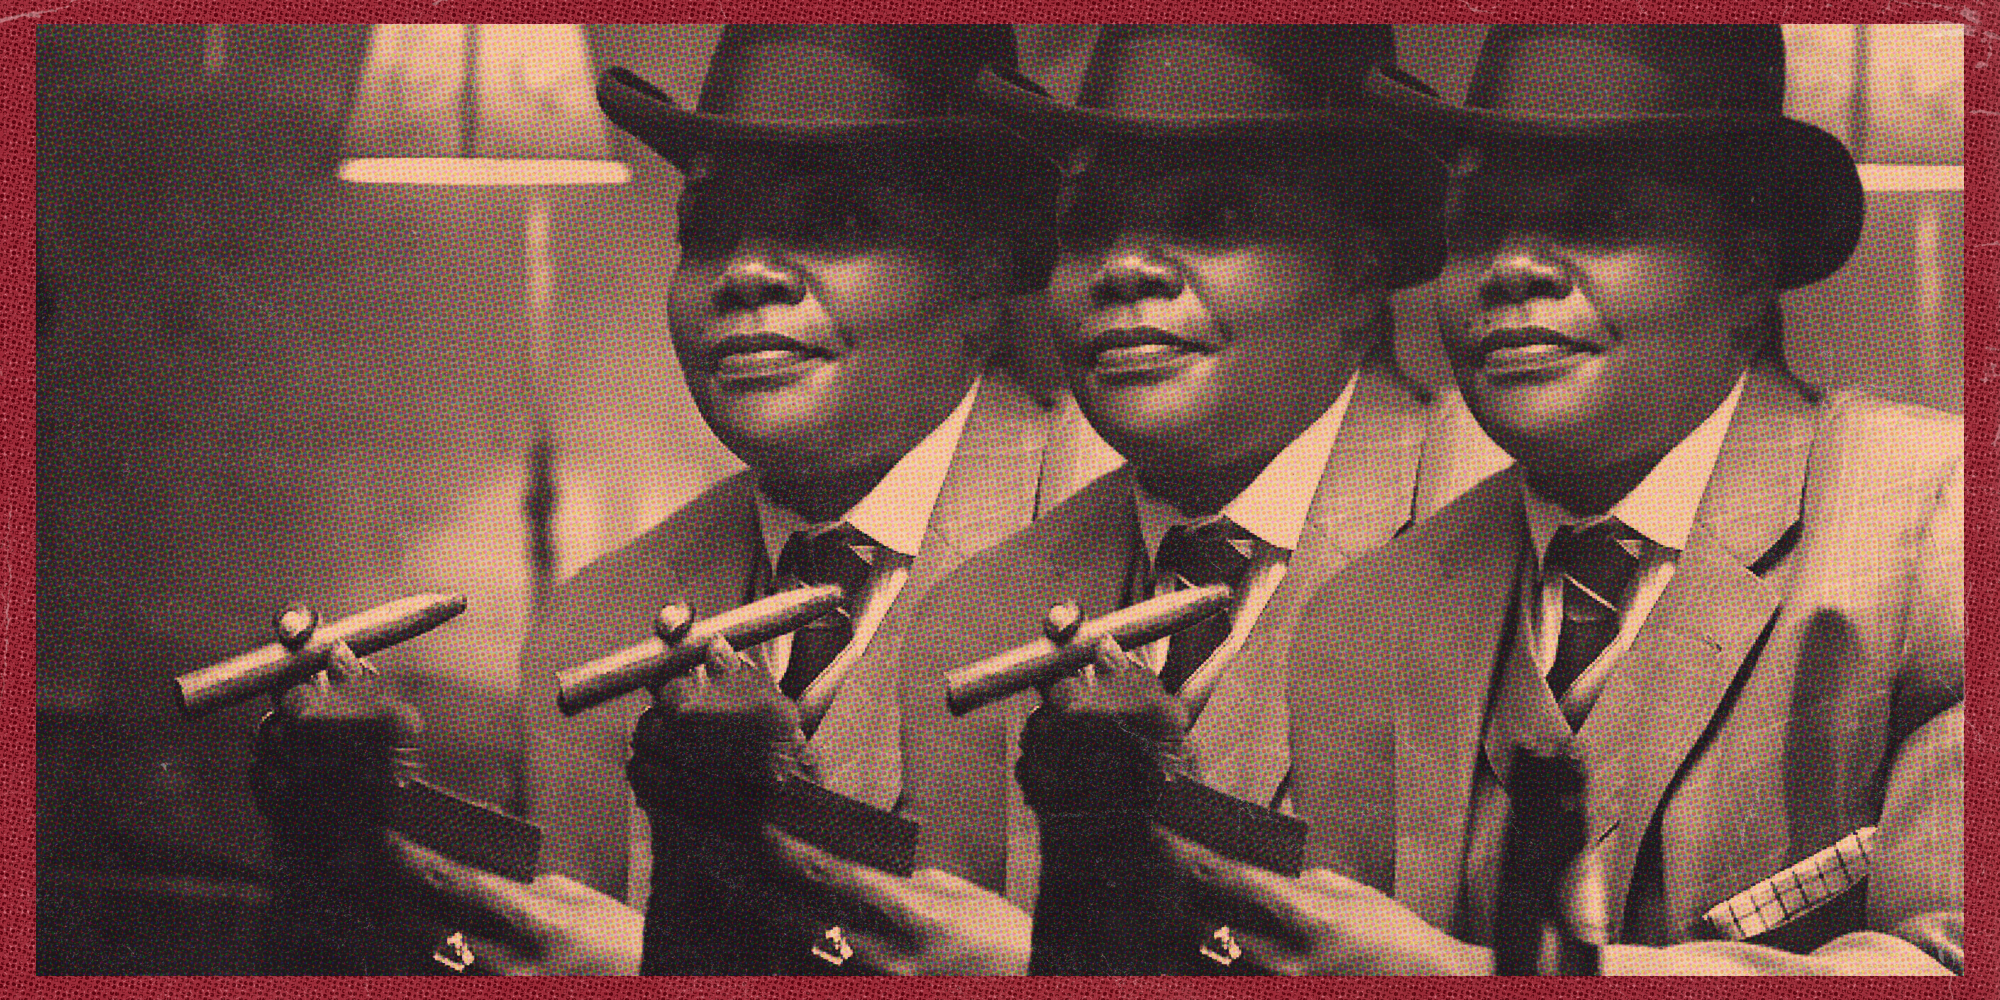 A still from Ma Rainey's Black Bottom with Monique as Ma Rainey in a butch outfit with hat and cigar repeated three times in a sepia tone